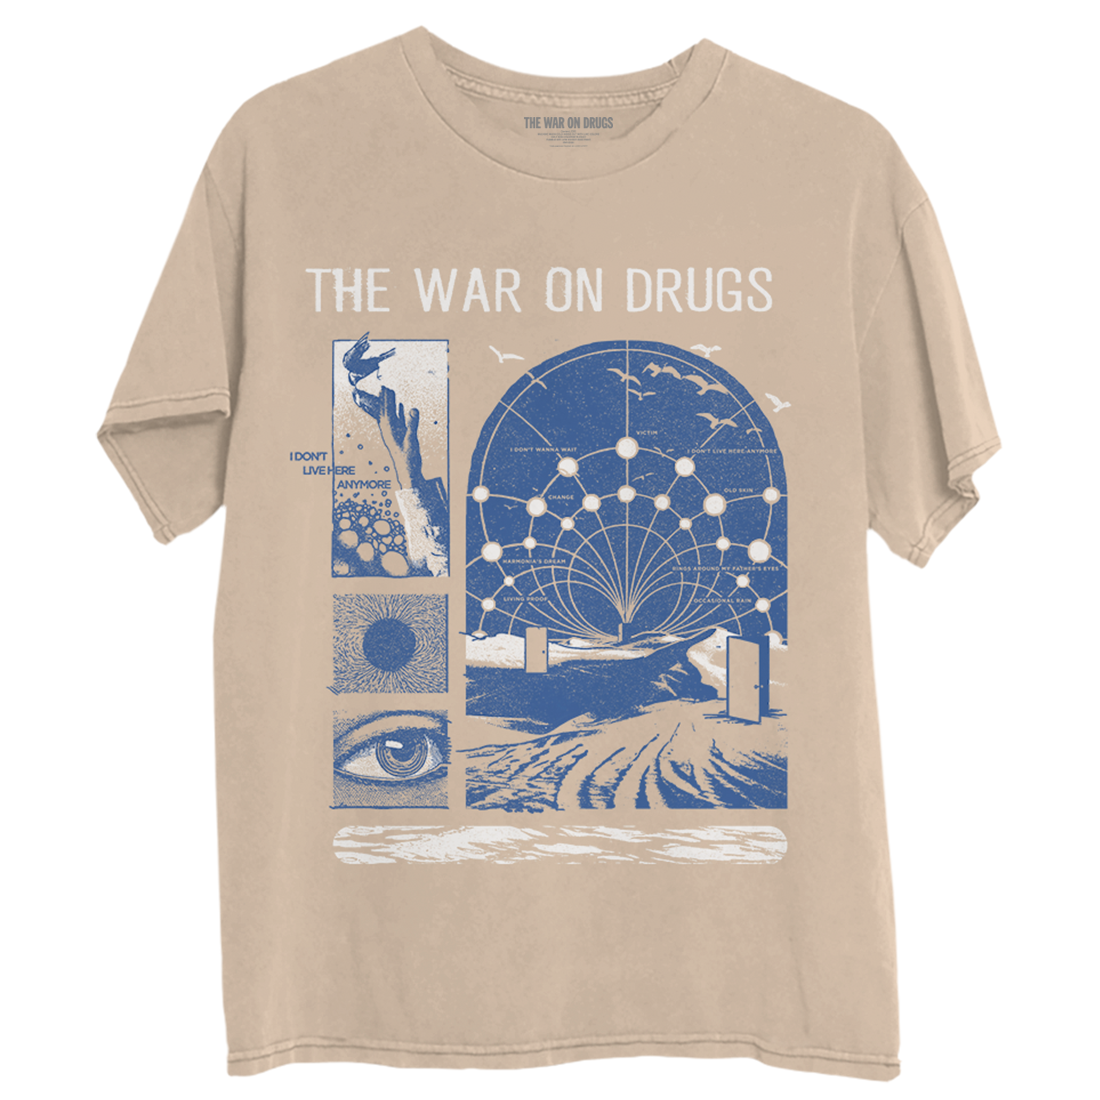 The War On Drugs - I Don't Live Here Anymore Tracklist T-Shirt